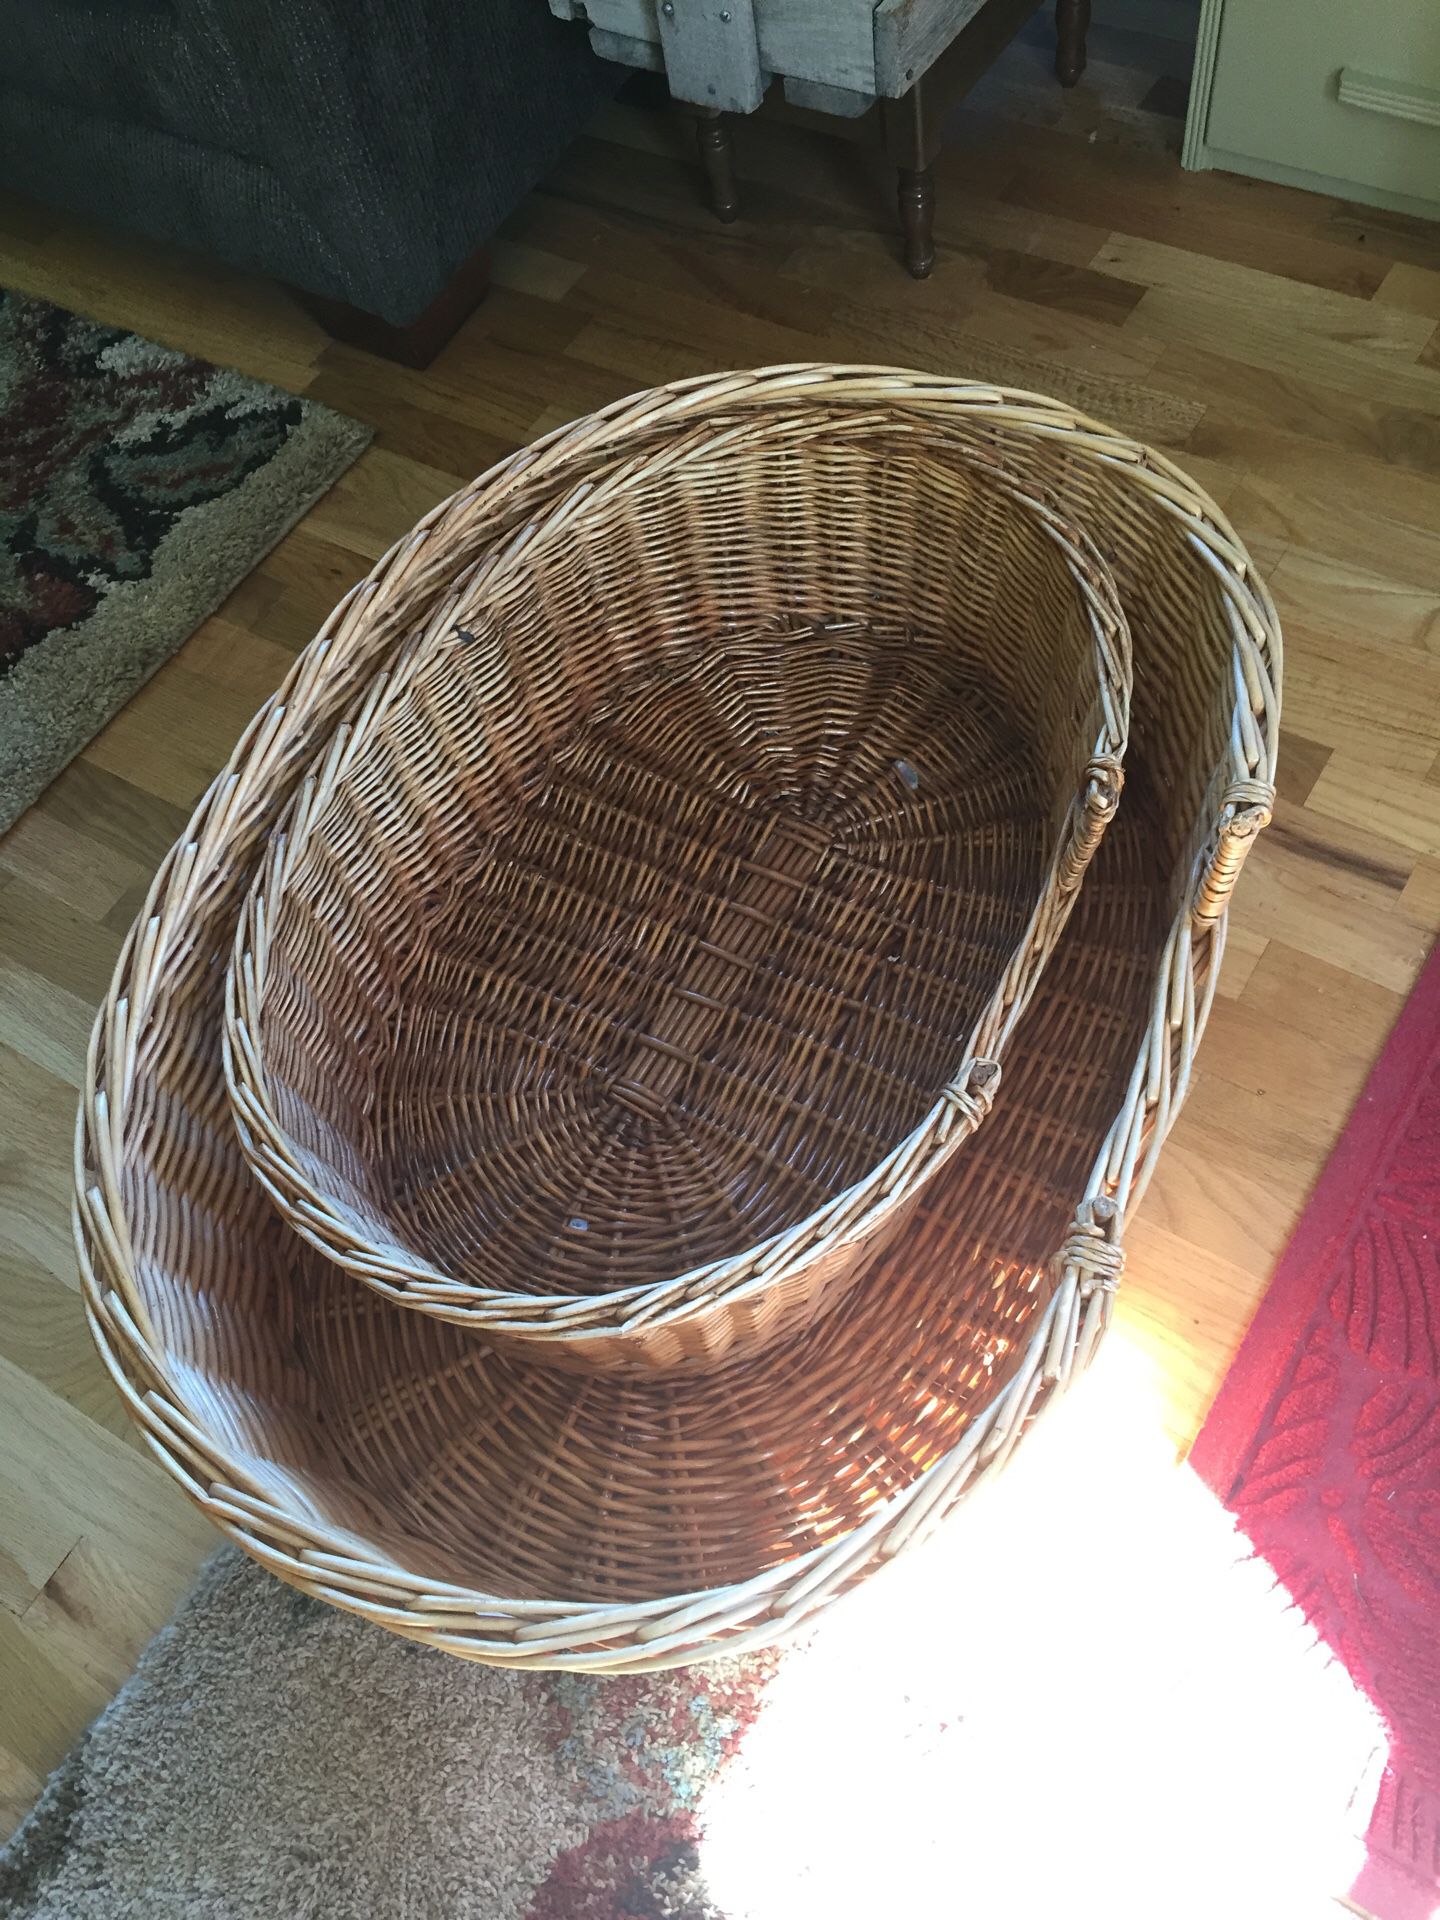 Basket dog beds. I is 33x23x10. The other is 27x18x8. They are both in great shape . Asking $50 for both or $40 for large and $20 for small.